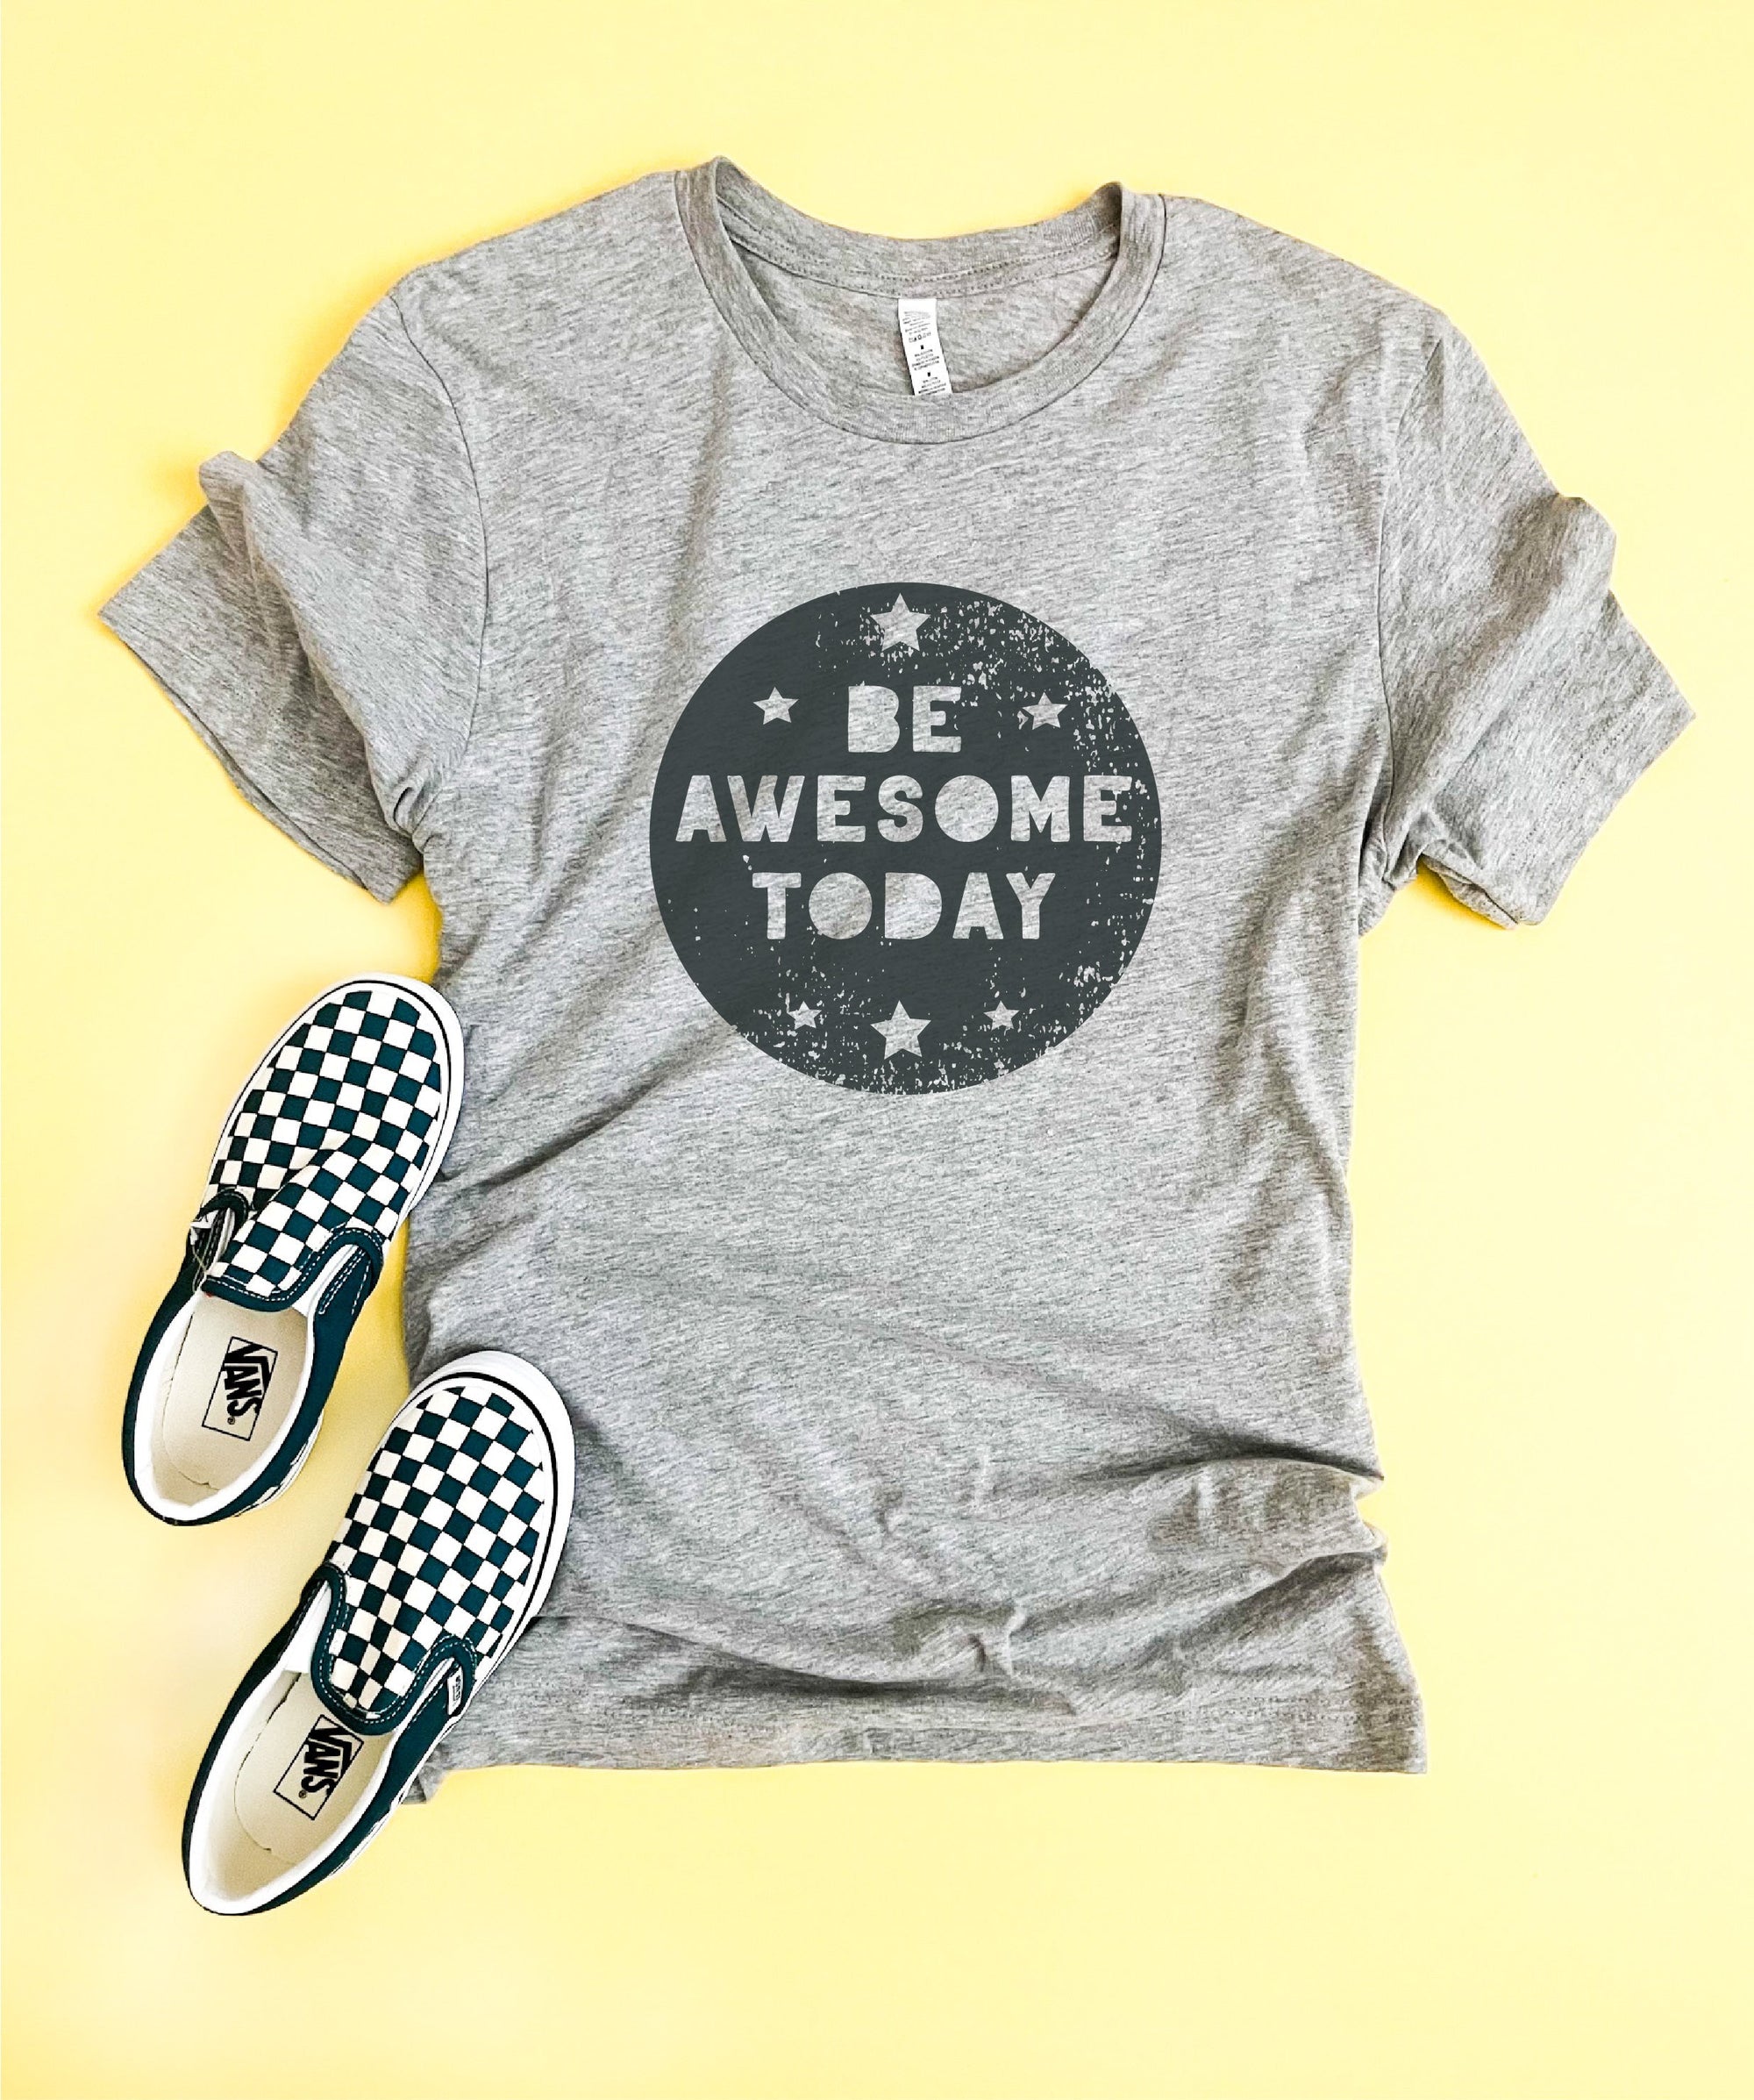 Be awesome today kids tee Short sleeve inspirational tee Next Level 3310 kids tee 